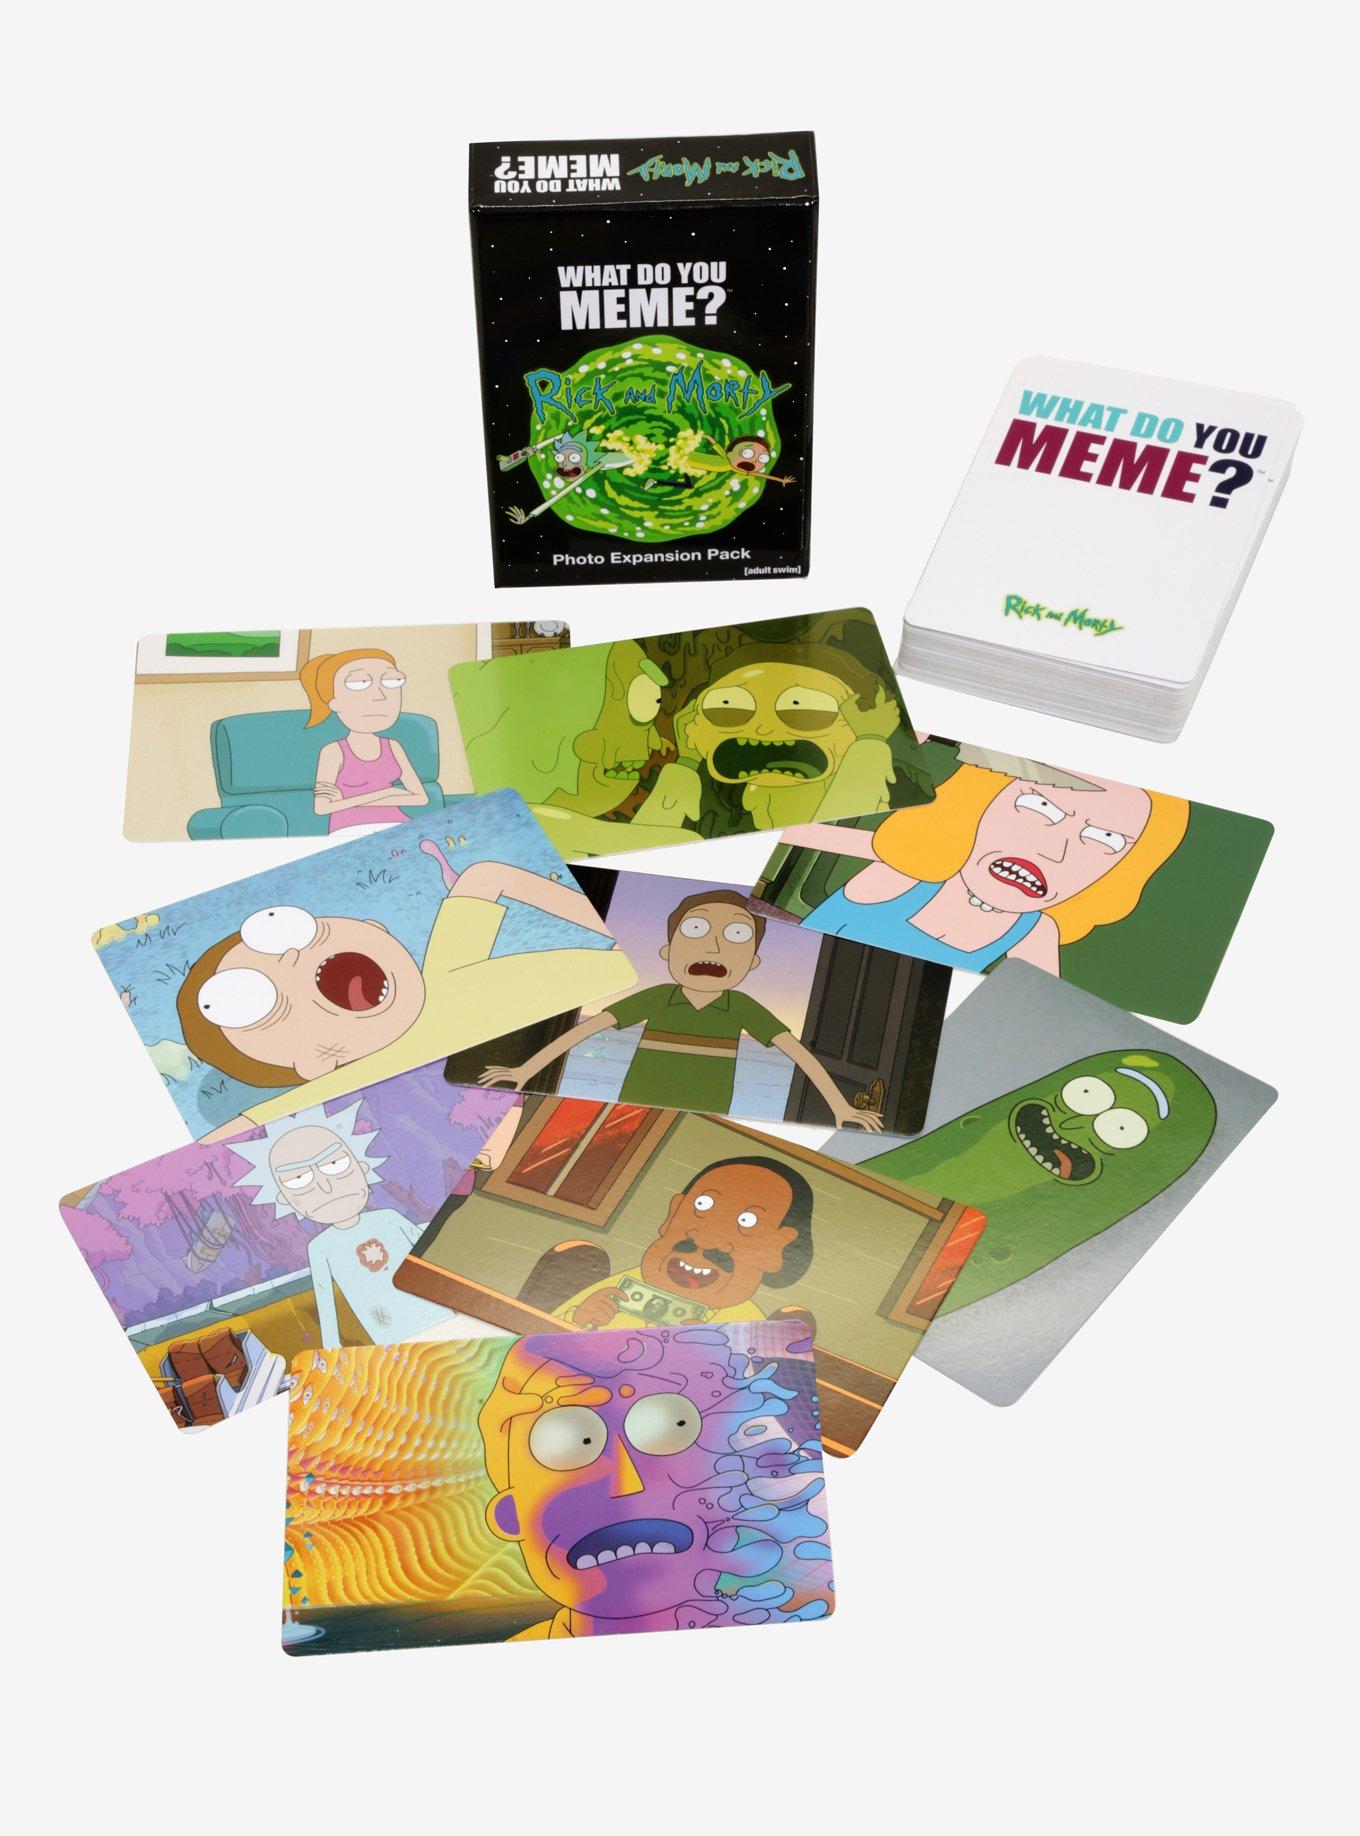 WHAT DO YOU MEME Rick and Morty Expansion Pack 75 photo cards New Sealed 